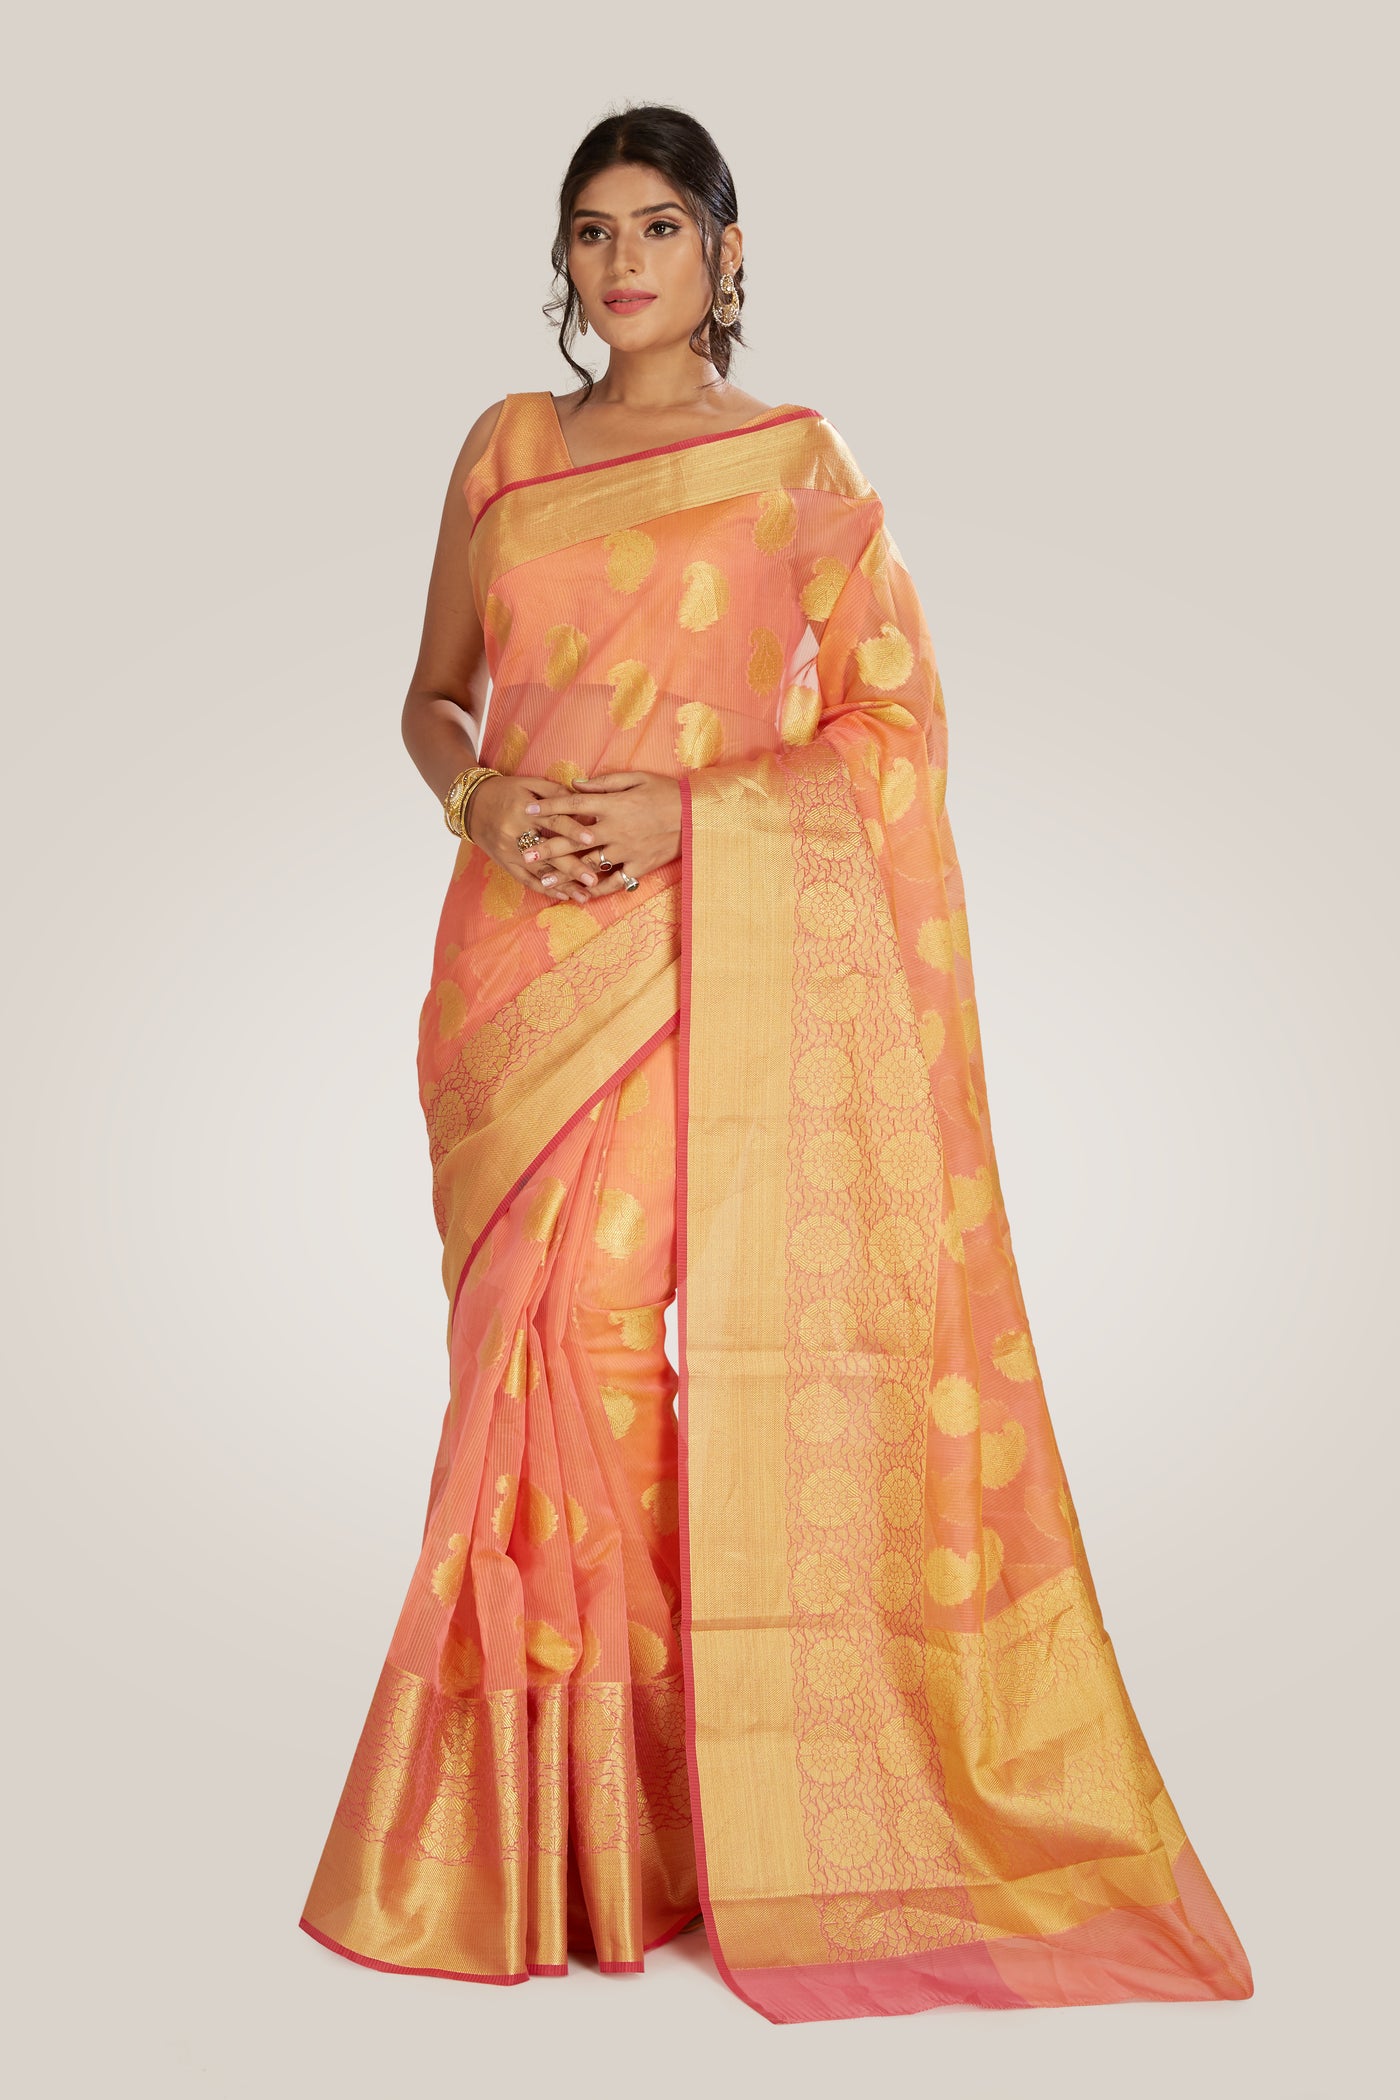 Banarasi Saree in Peach-Gold - Indian Clothing in Denver, CO, Aurora, CO, Boulder, CO, Fort Collins, CO, Colorado Springs, CO, Parker, CO, Highlands Ranch, CO, Cherry Creek, CO, Centennial, CO, and Longmont, CO. Nationwide shipping USA - India Fashion X